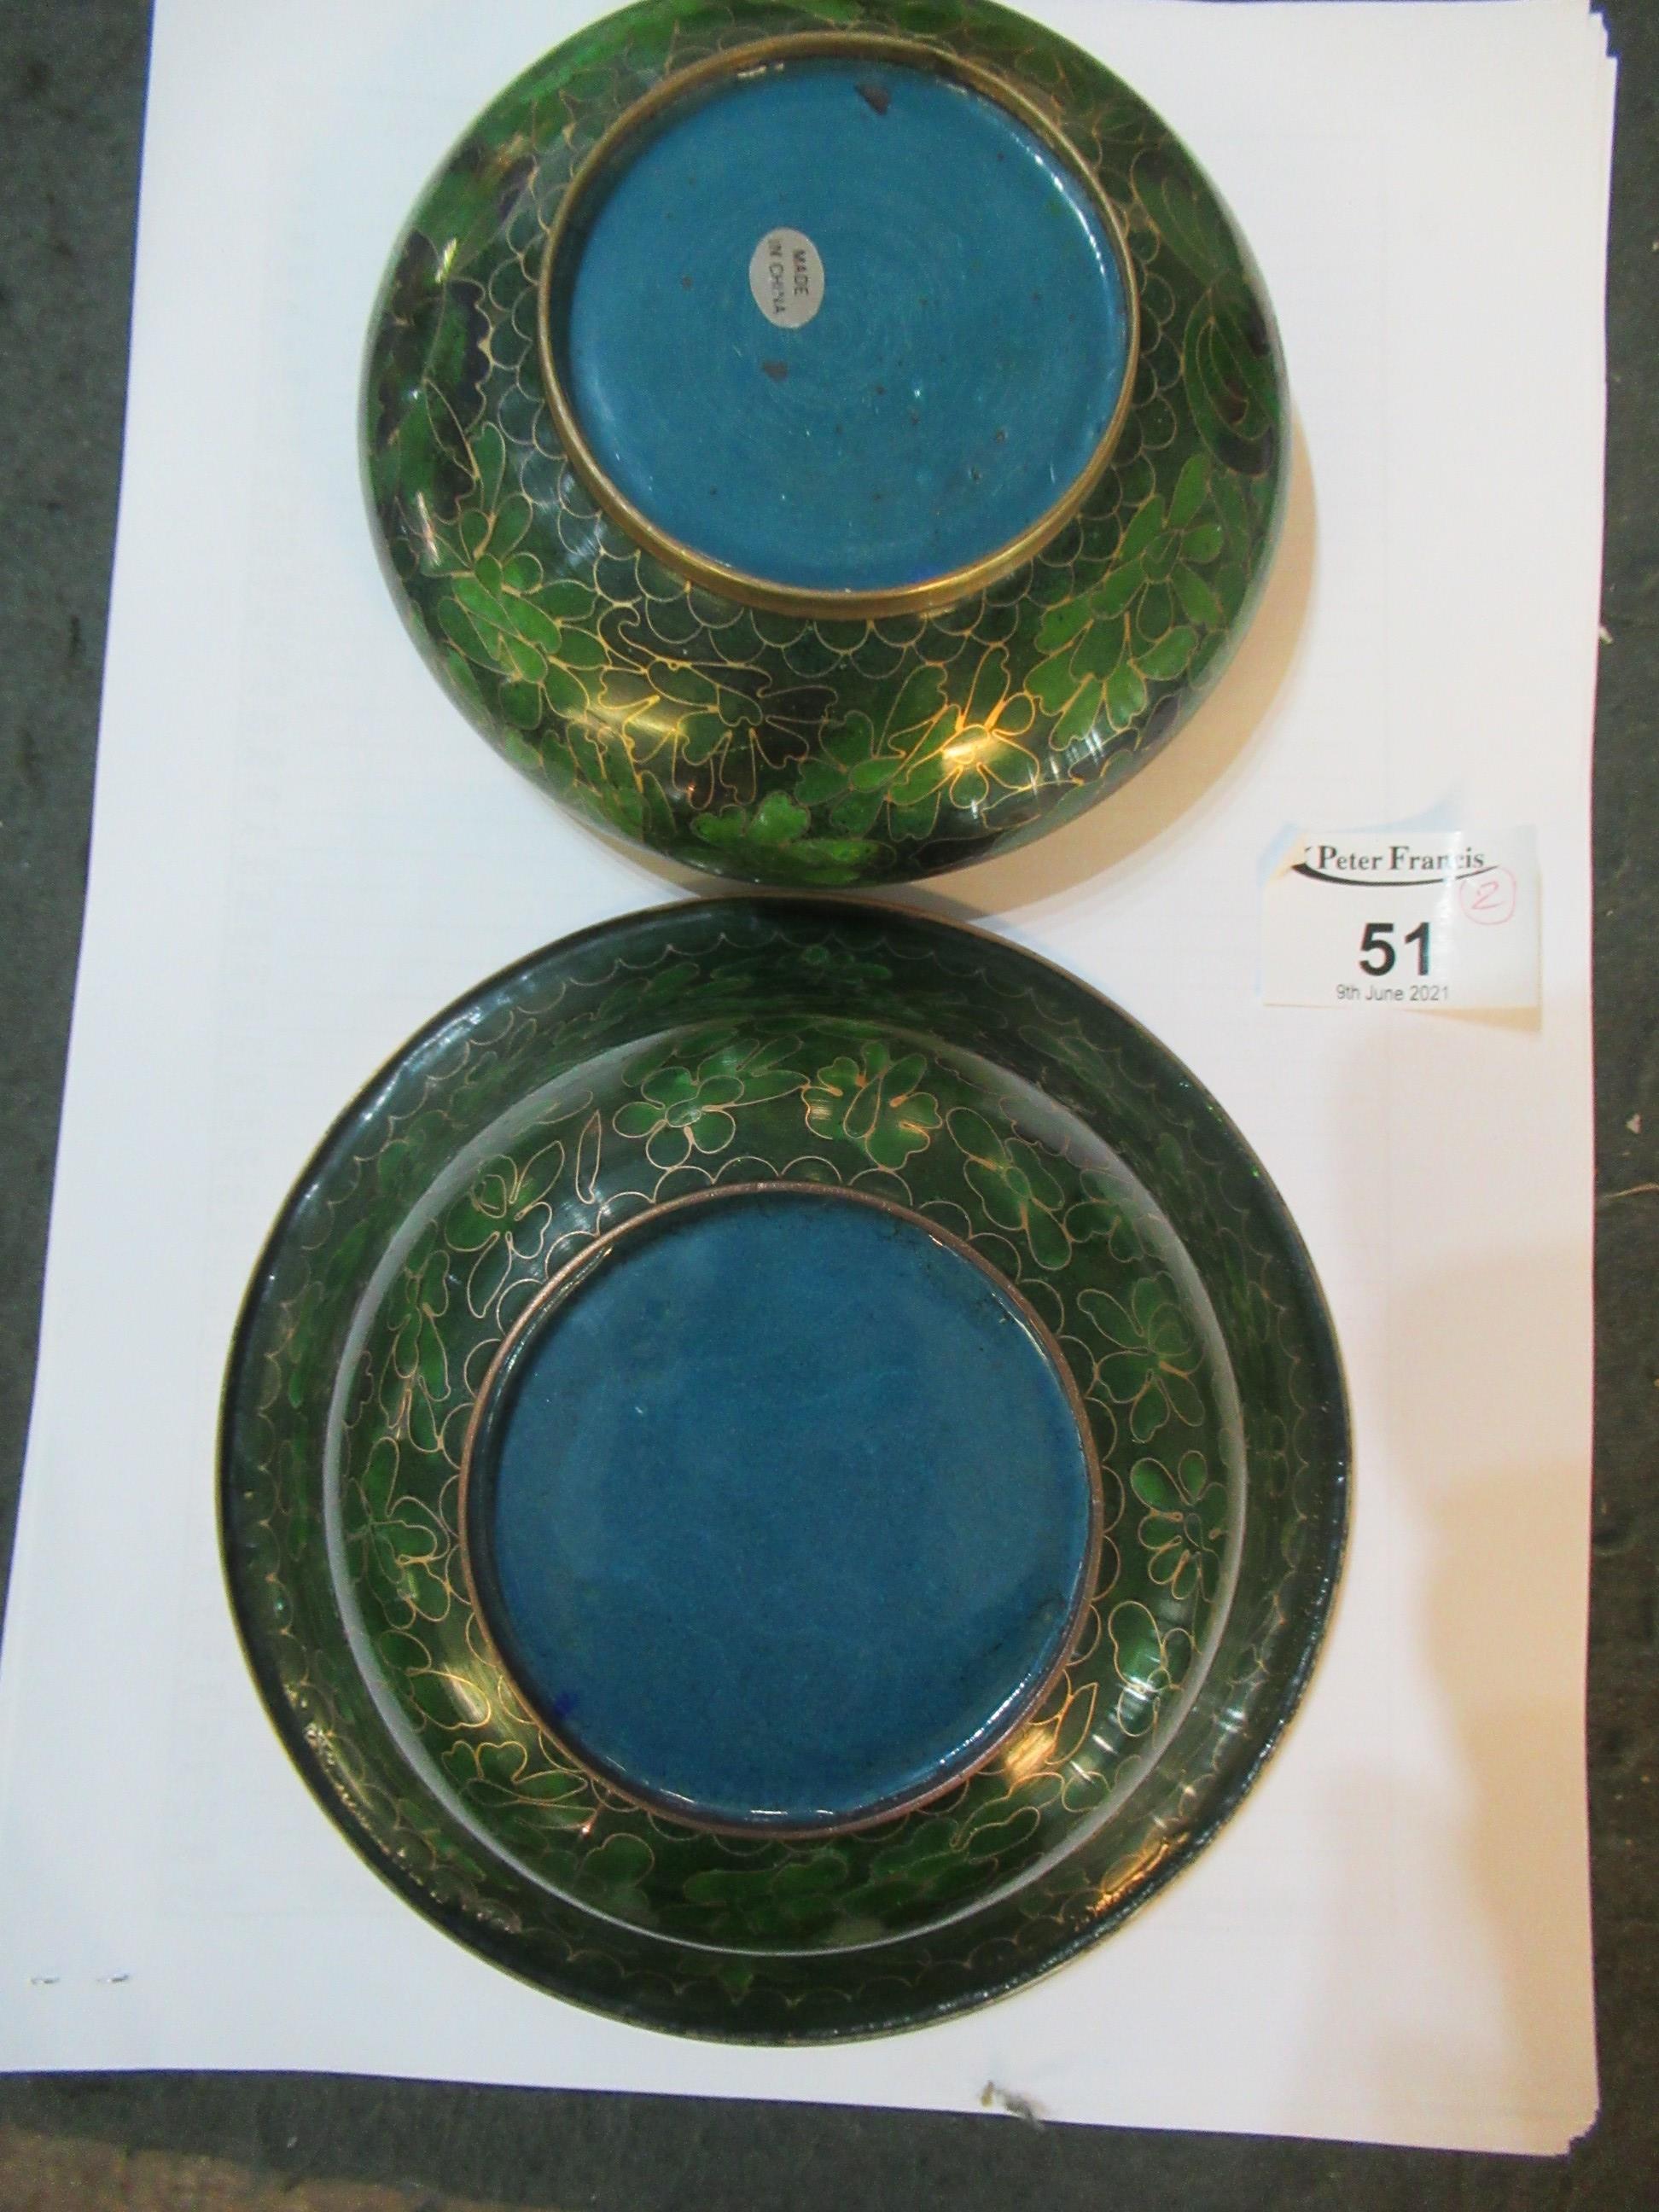 Two similar Chinese cloisonne green ground floral and foliate censers or bowls on hardwood - Image 2 of 2